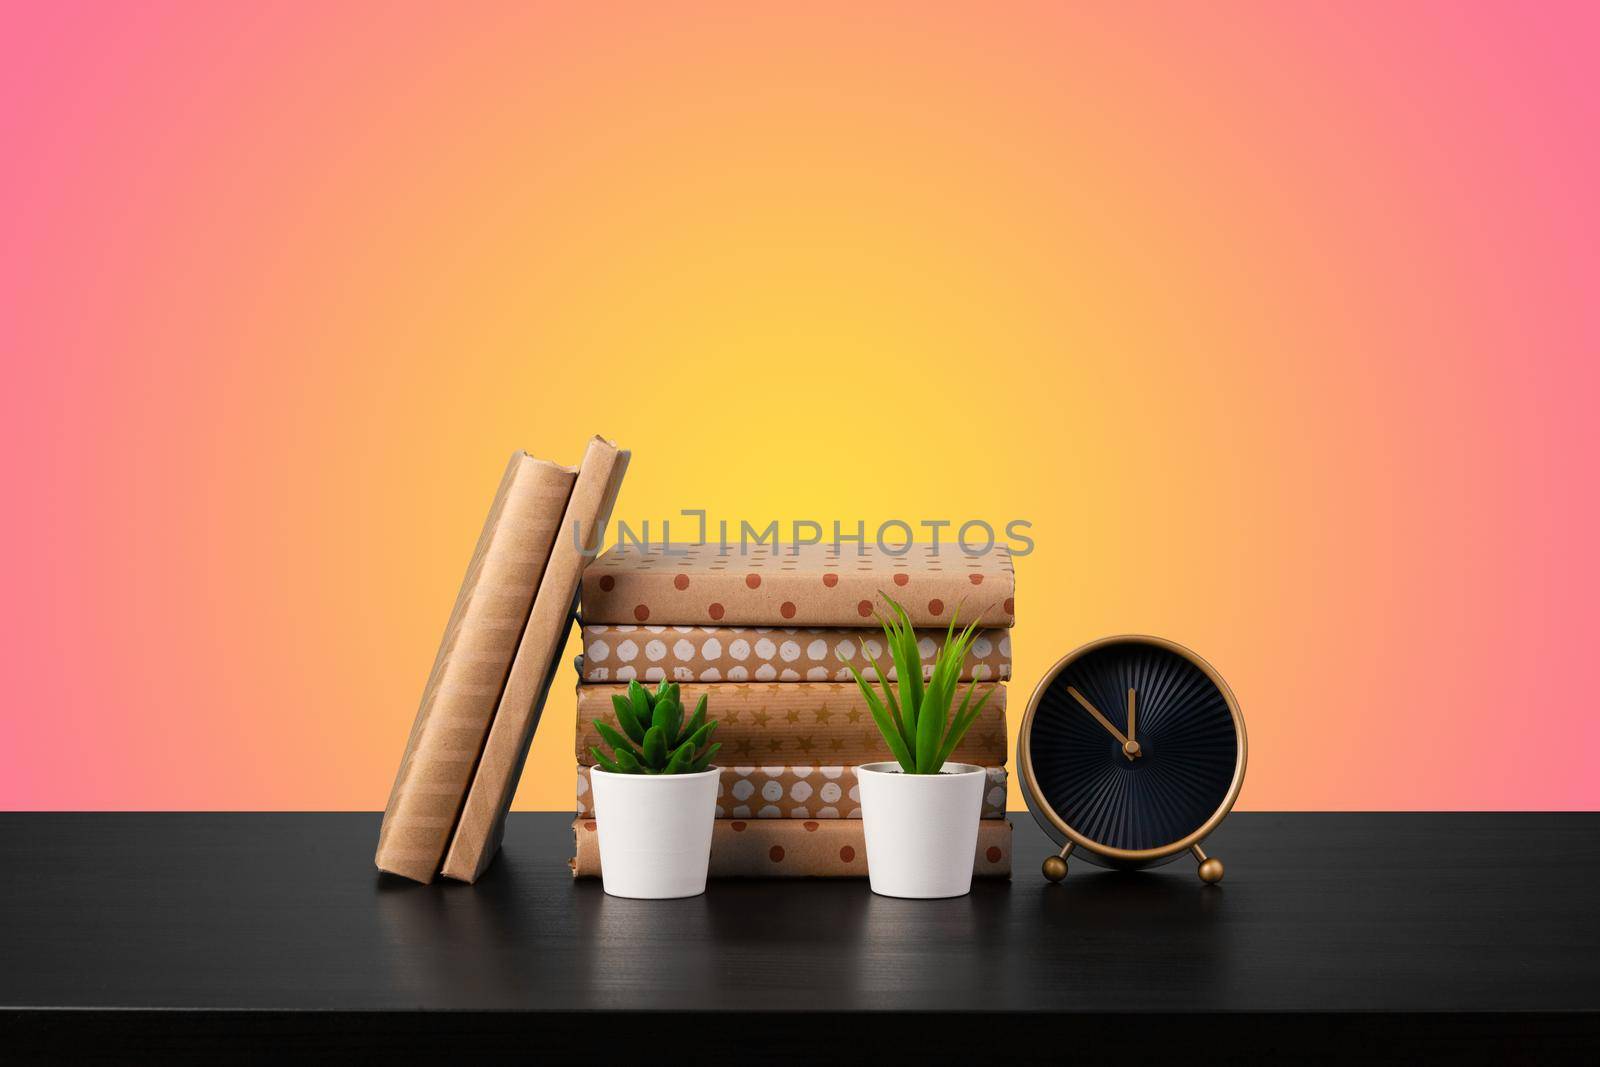 Education concept with stack of books on a table against colored background, front view